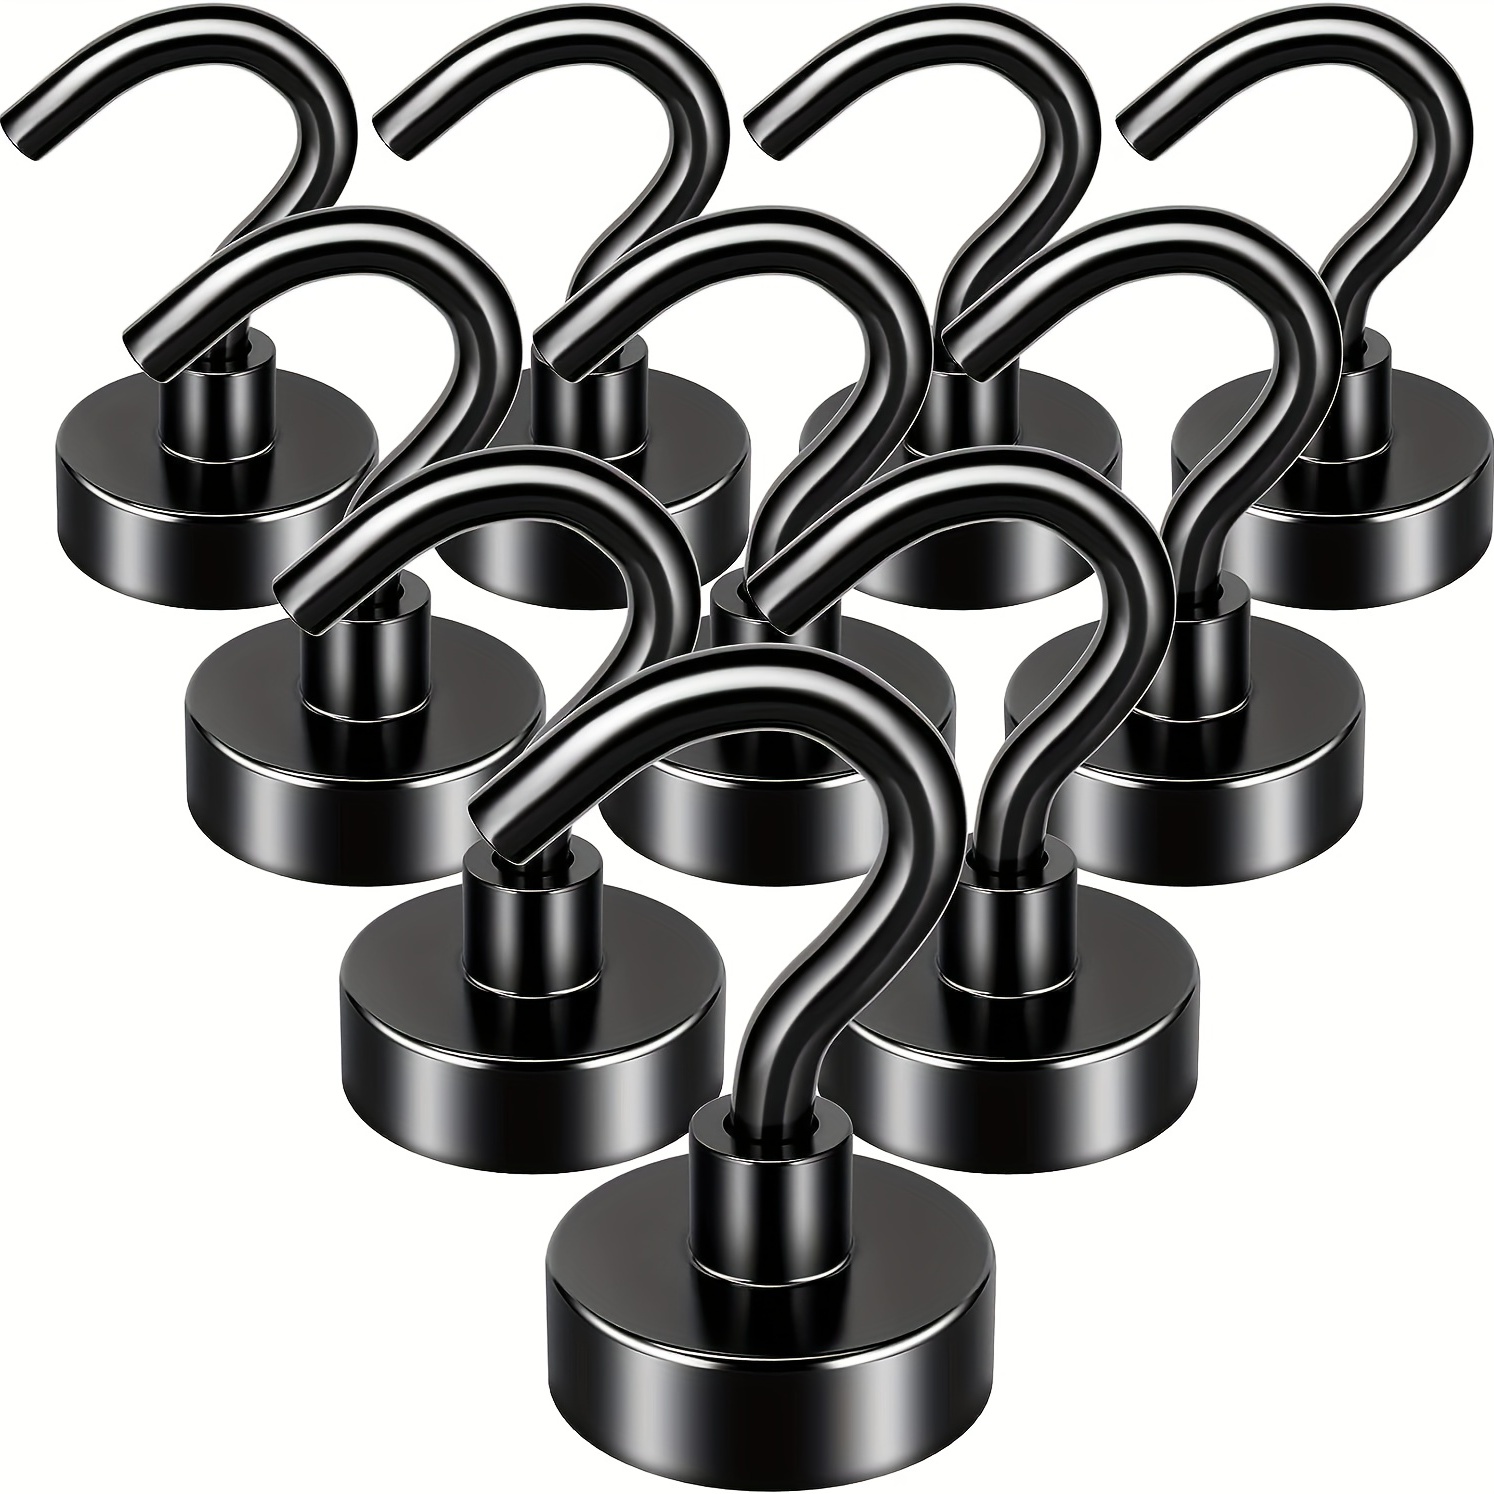 

10pcs Black Magnetic Hook, 25 Lb Neodymium Magnet Hook For Hanging, Strong Magnetic Hook Magnet With Hook, Suitable For Home, Kitchen, Office, Warehouse